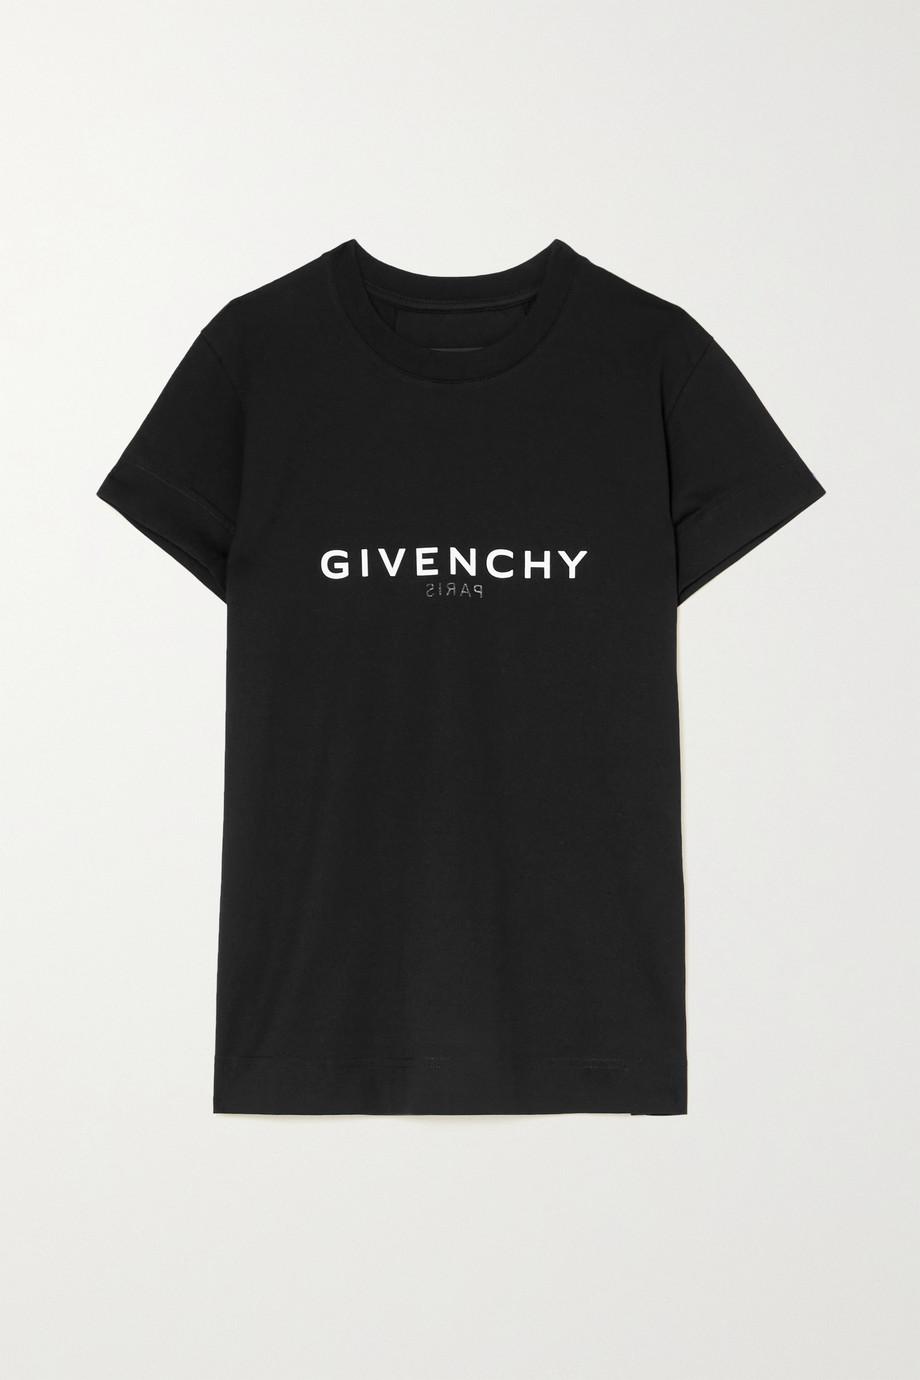 Printed cotton-jersey T-shirt by GIVENCHY